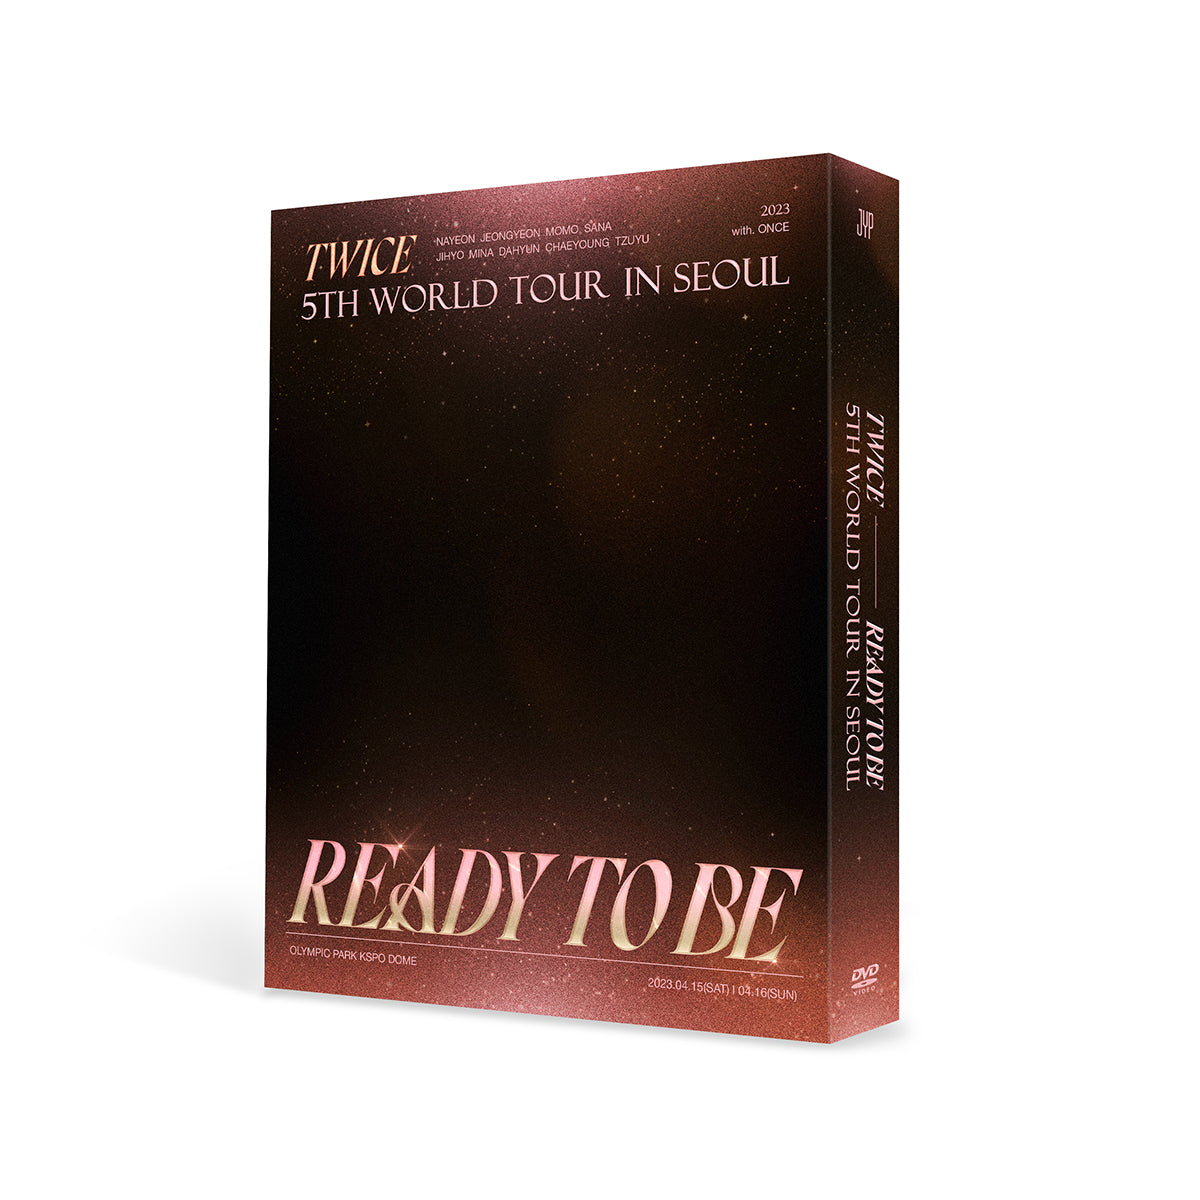 TWICE - TWICE 5TH WORLD TOUR [READY TO BE] IN SEOUL DVD [PRE-ORDER]